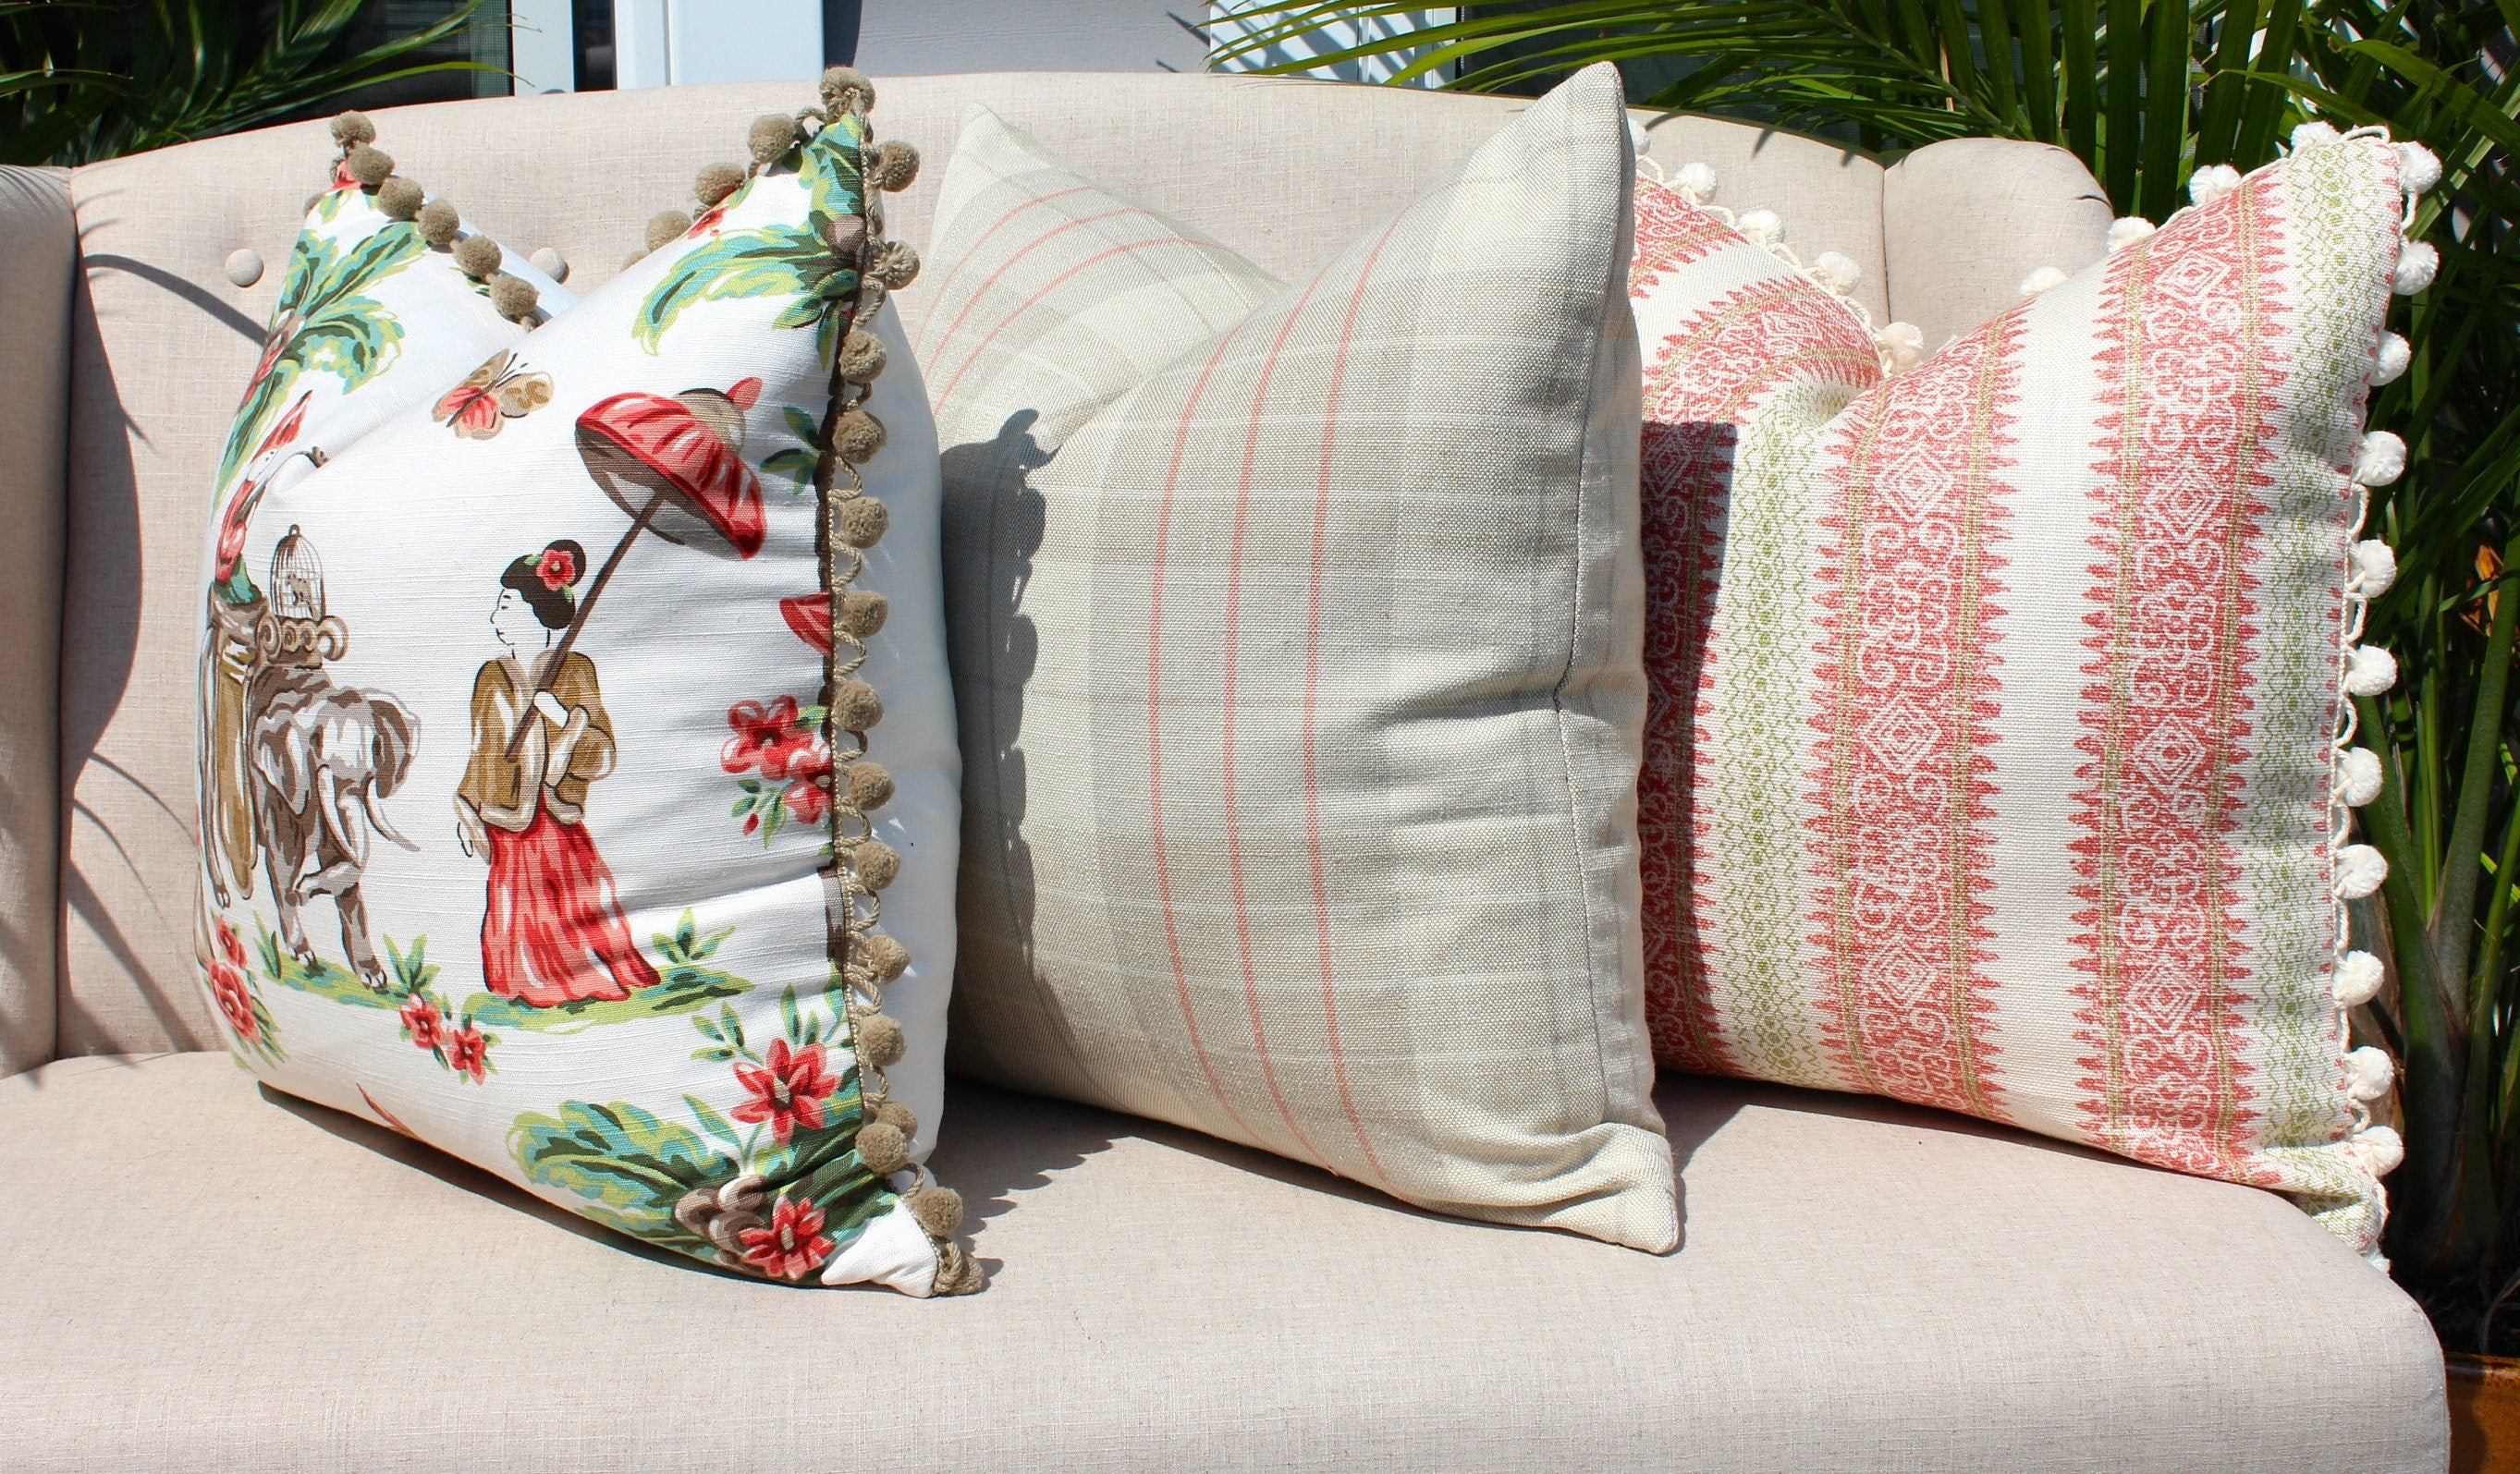 Boho Striped Pillow Cover in Coral and Lime Green embellished with Cream Ball Fringe.